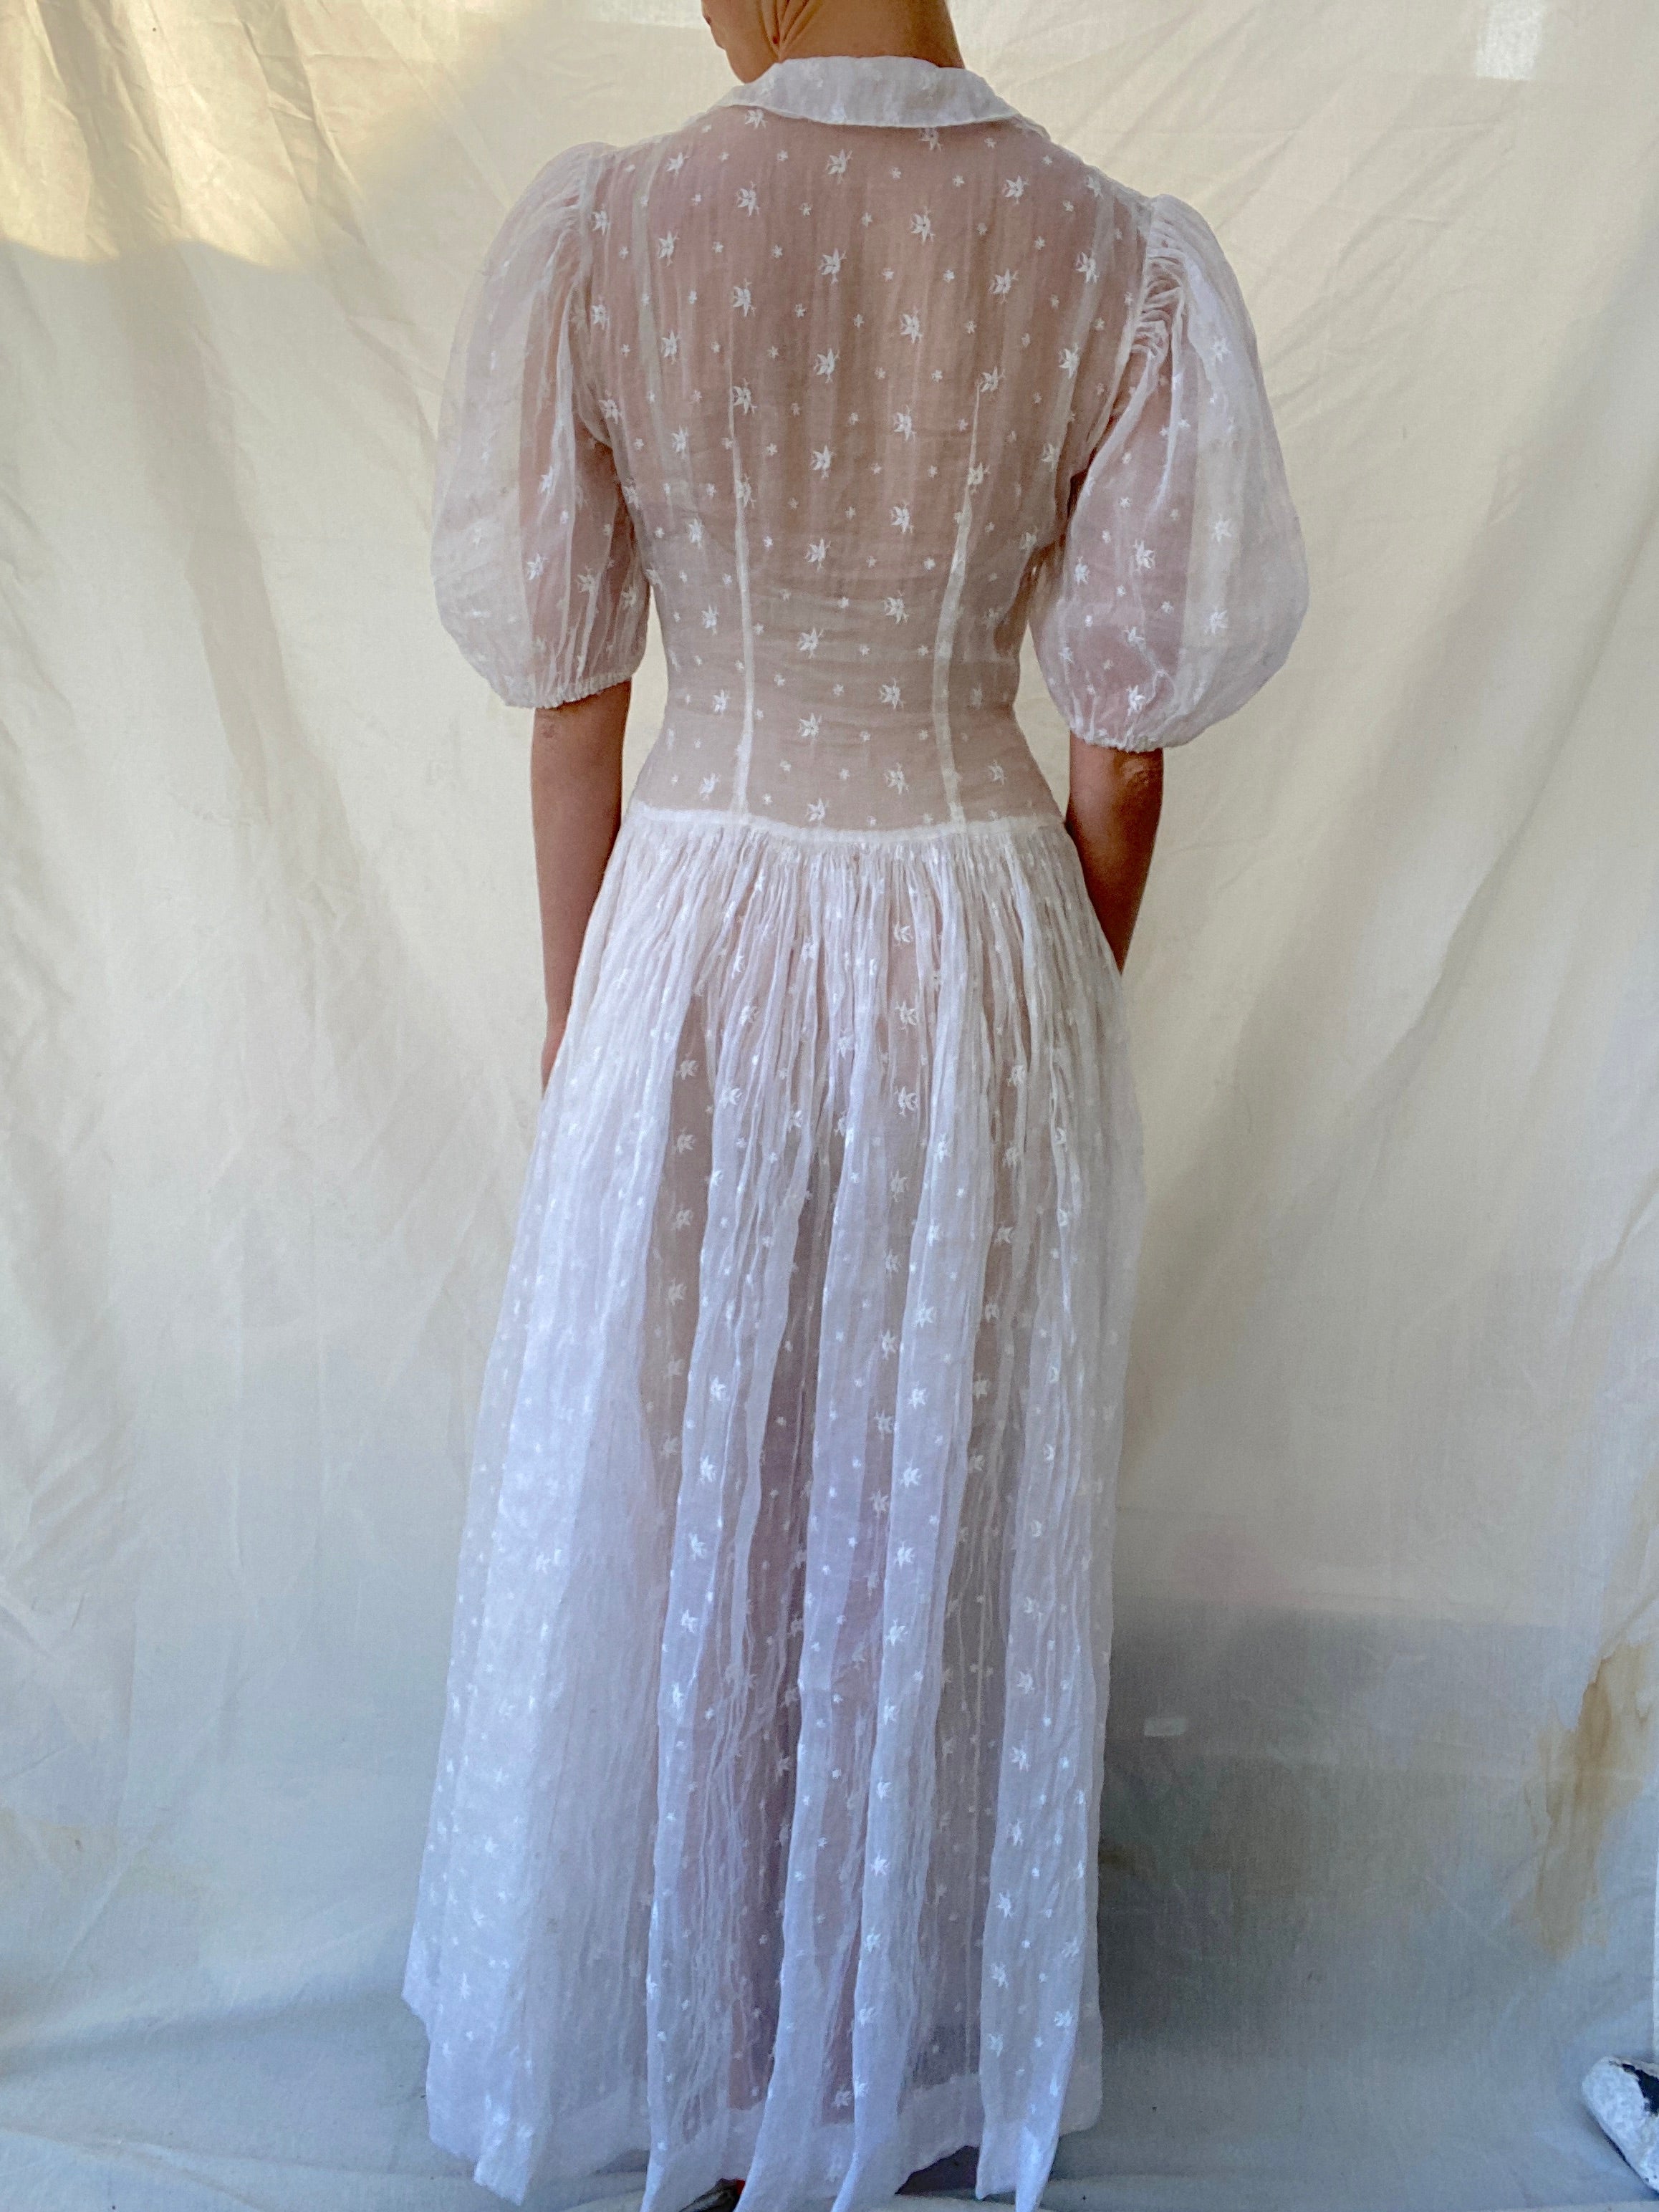 1930's White Organza Dress with Puffed Sleeves and Floral Embroidery